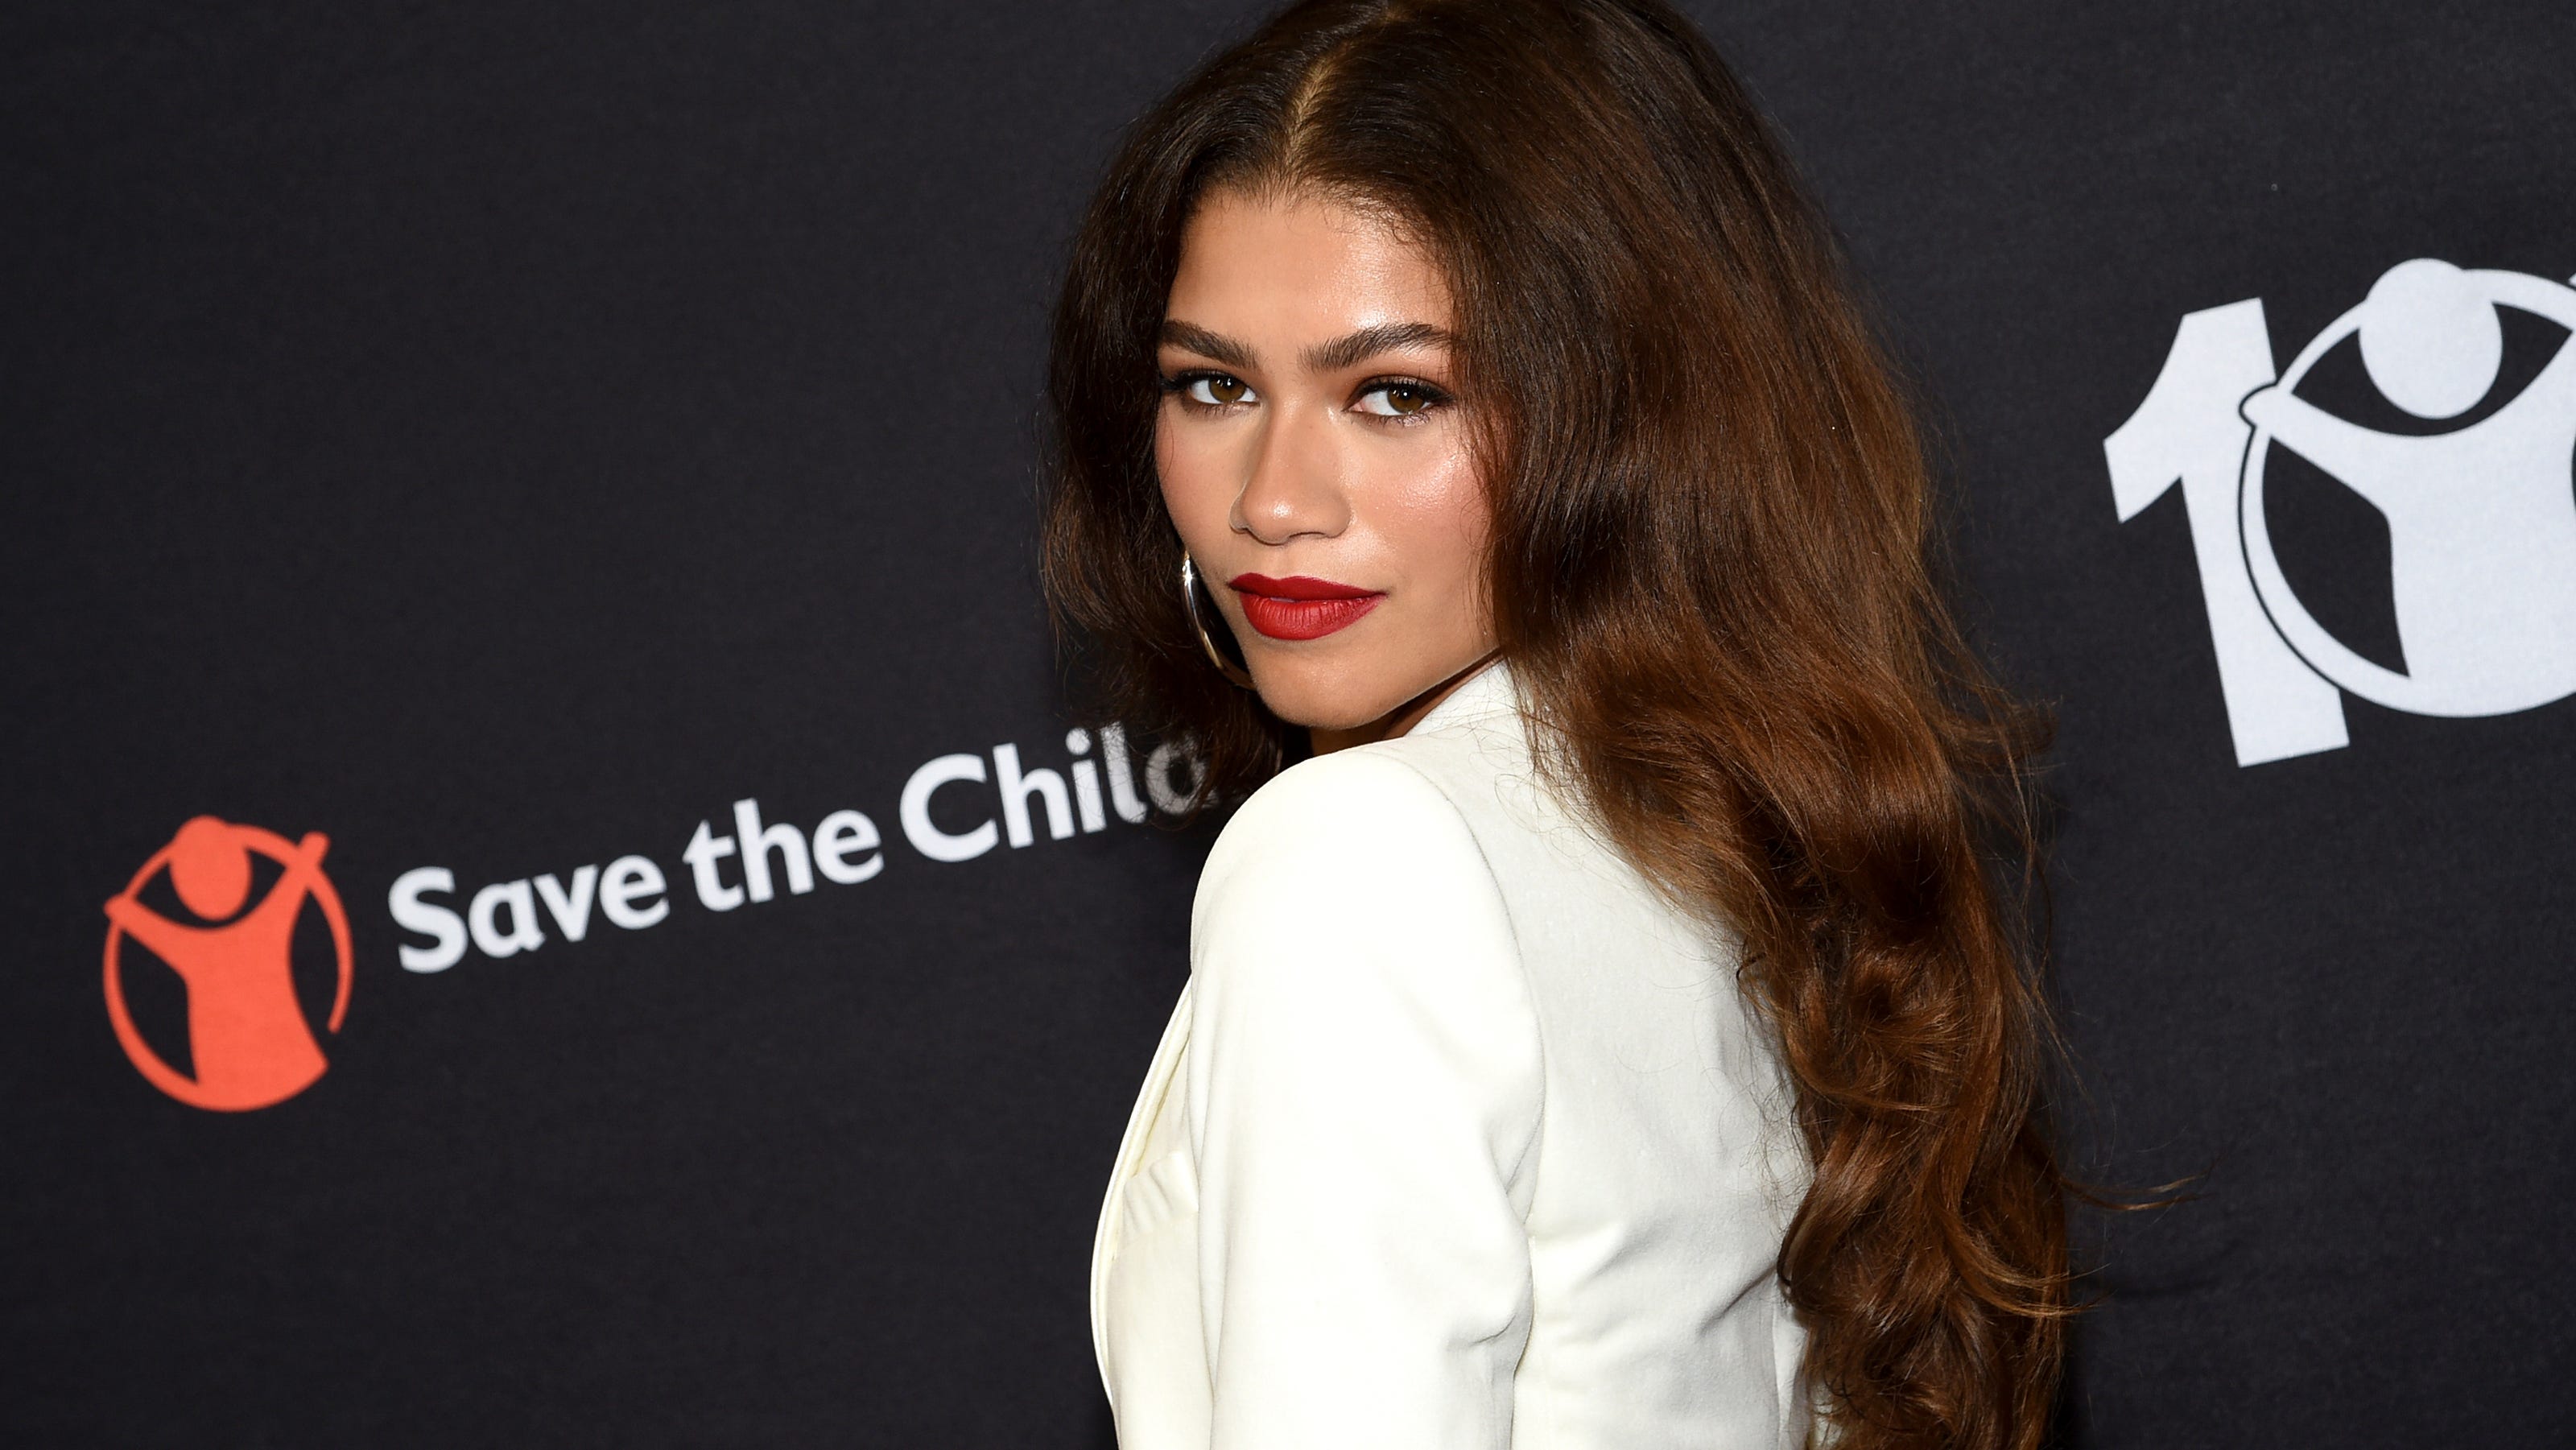 Zendaya Being A Young Black Woman In Hollywood Heavy Responsibility